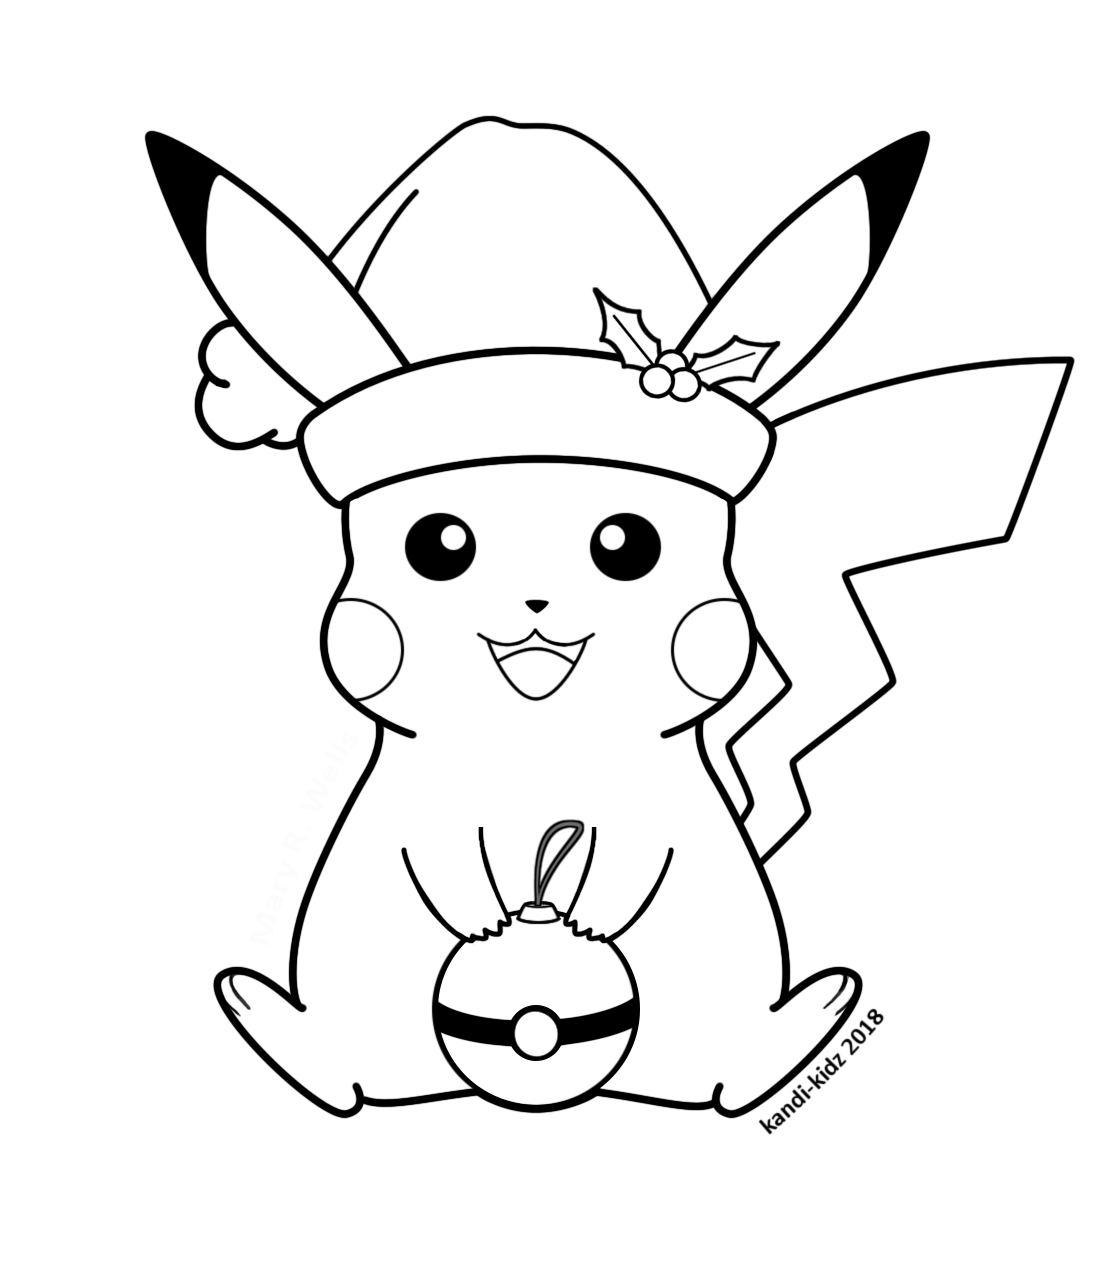 Pikachu Christmas Coloring Pages - brengosfilmitali